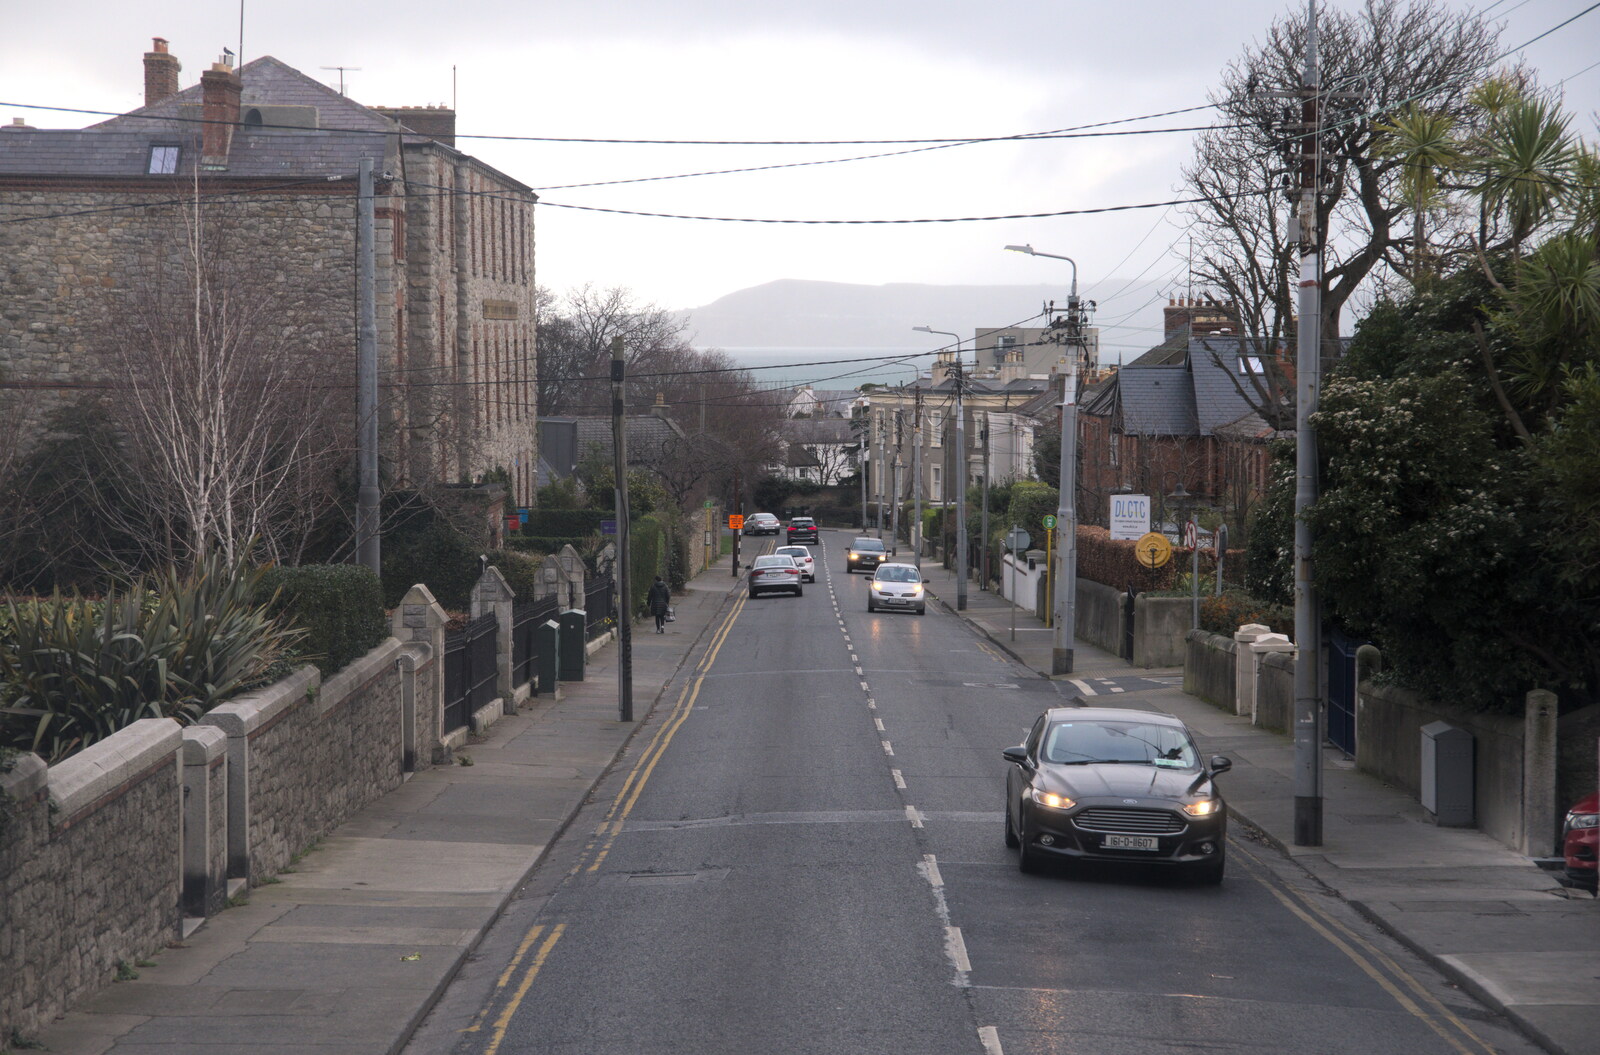 The End of the Breffni, Blackrock, Dublin - 18th February 2023: On York Road in Dun Laoghaire